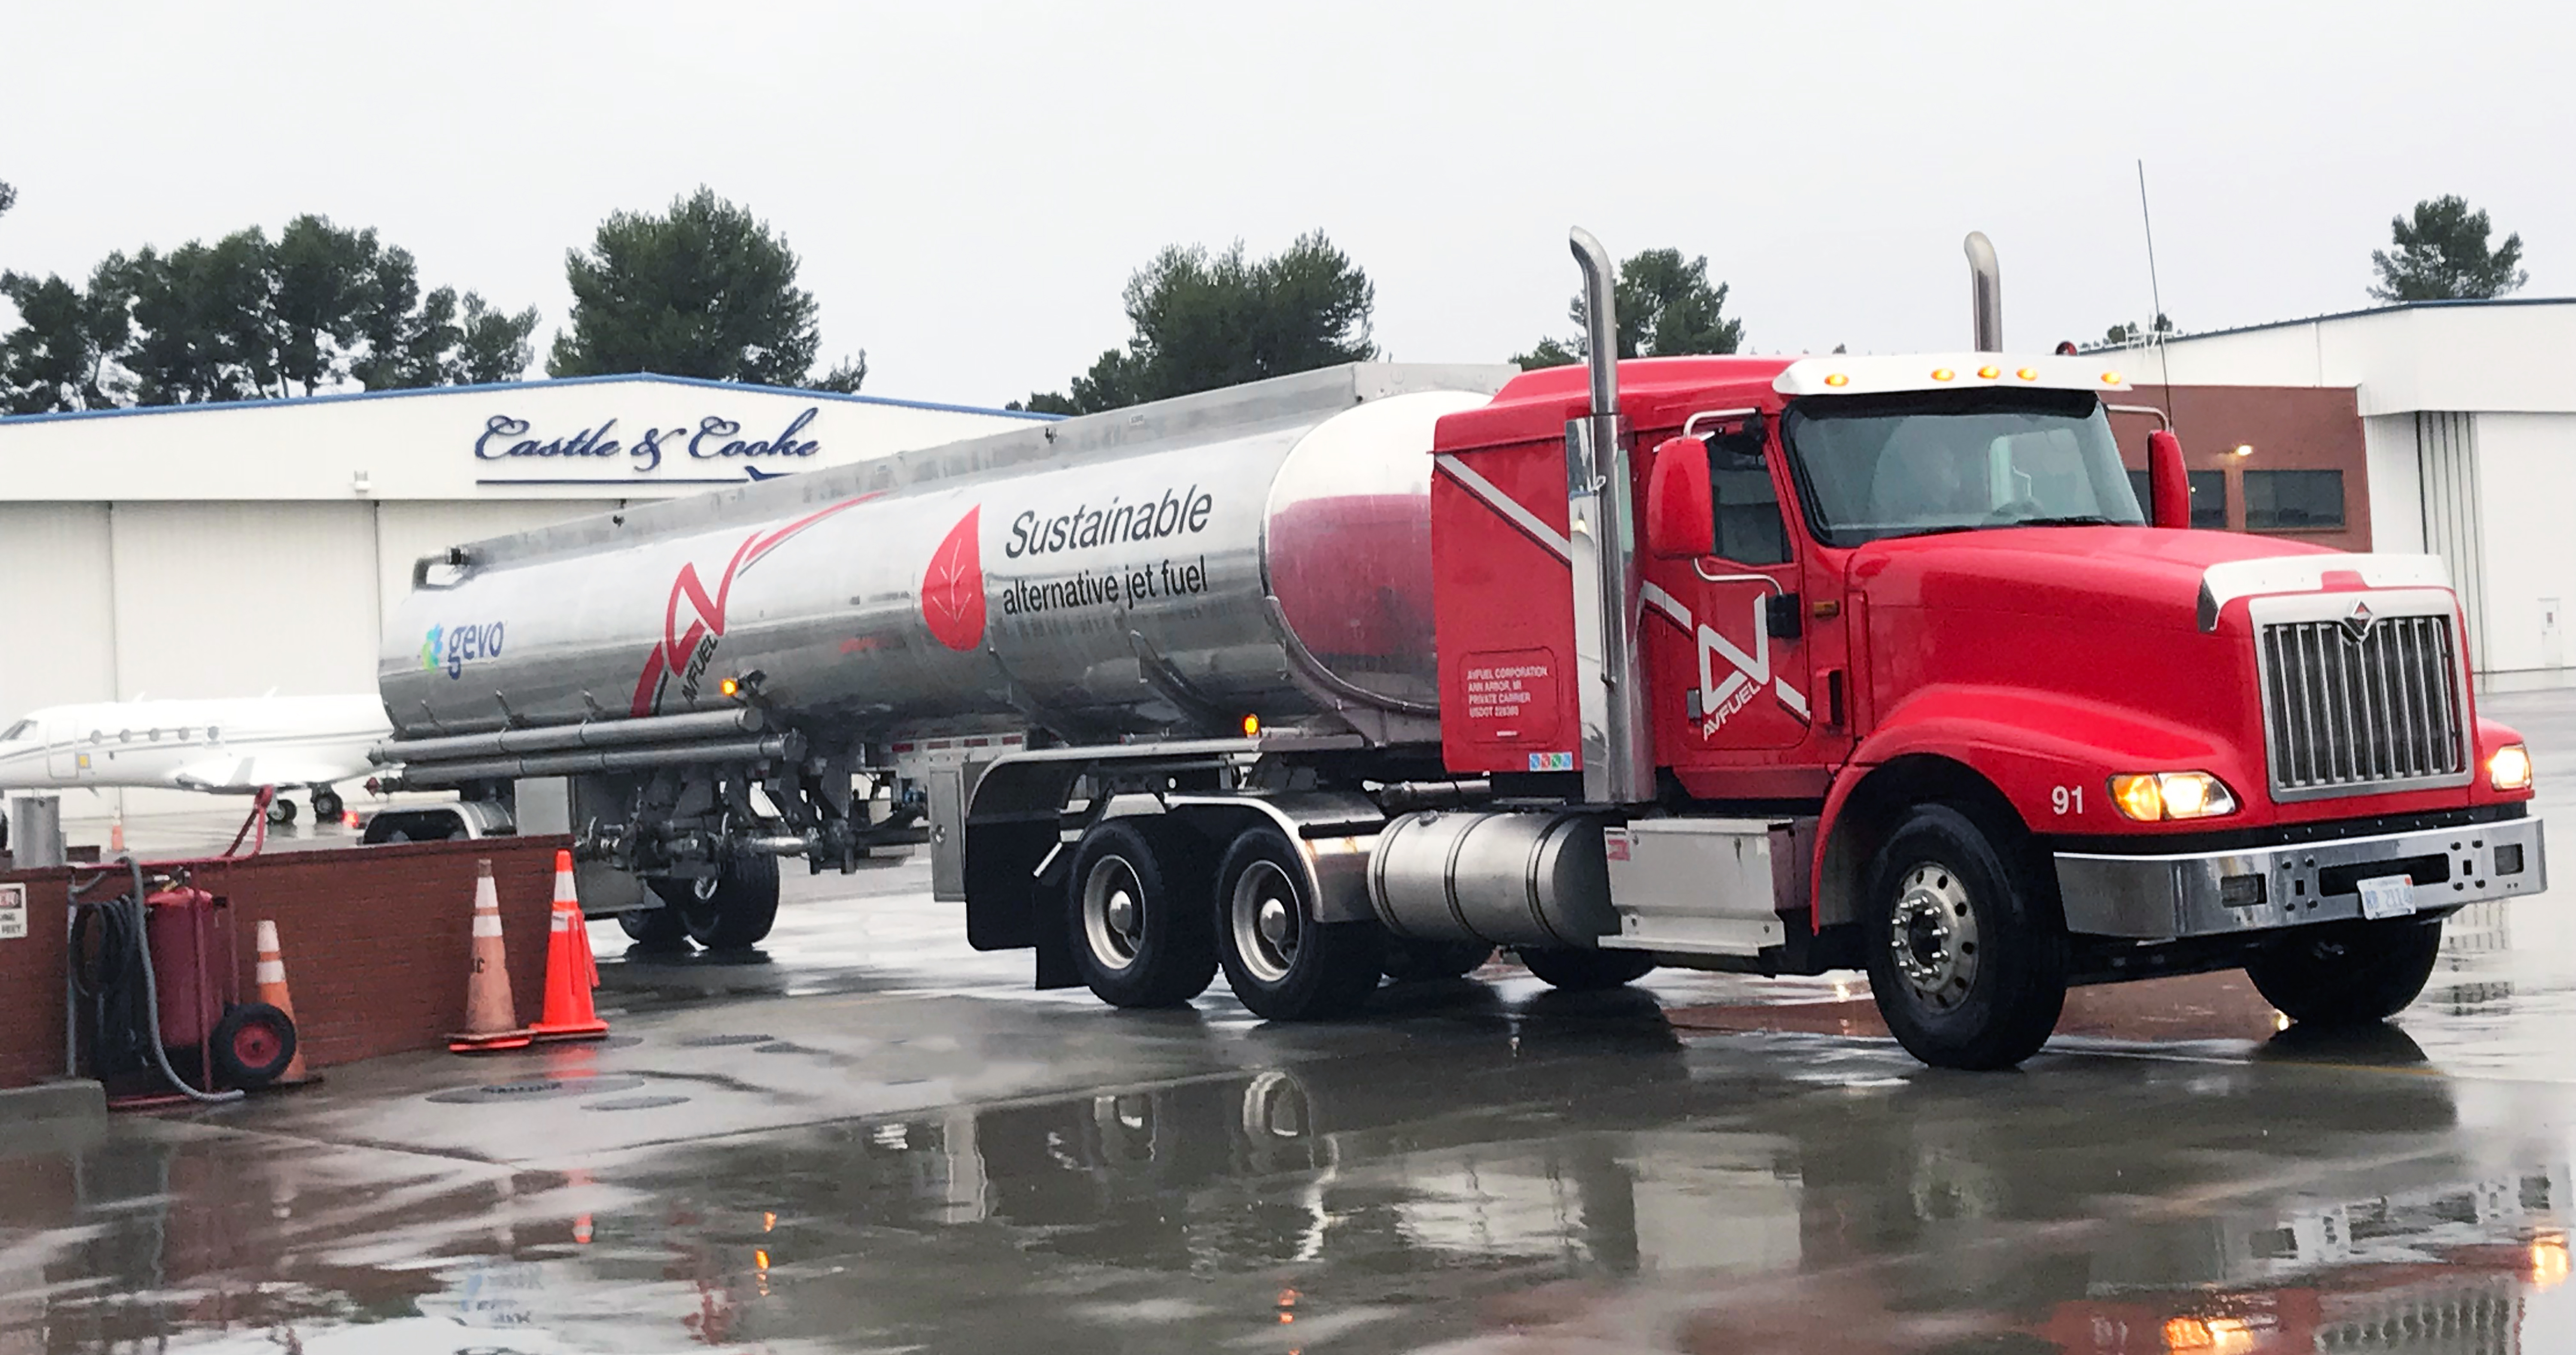 Avfuel makes first delivery of sustainable alternative jet fuel